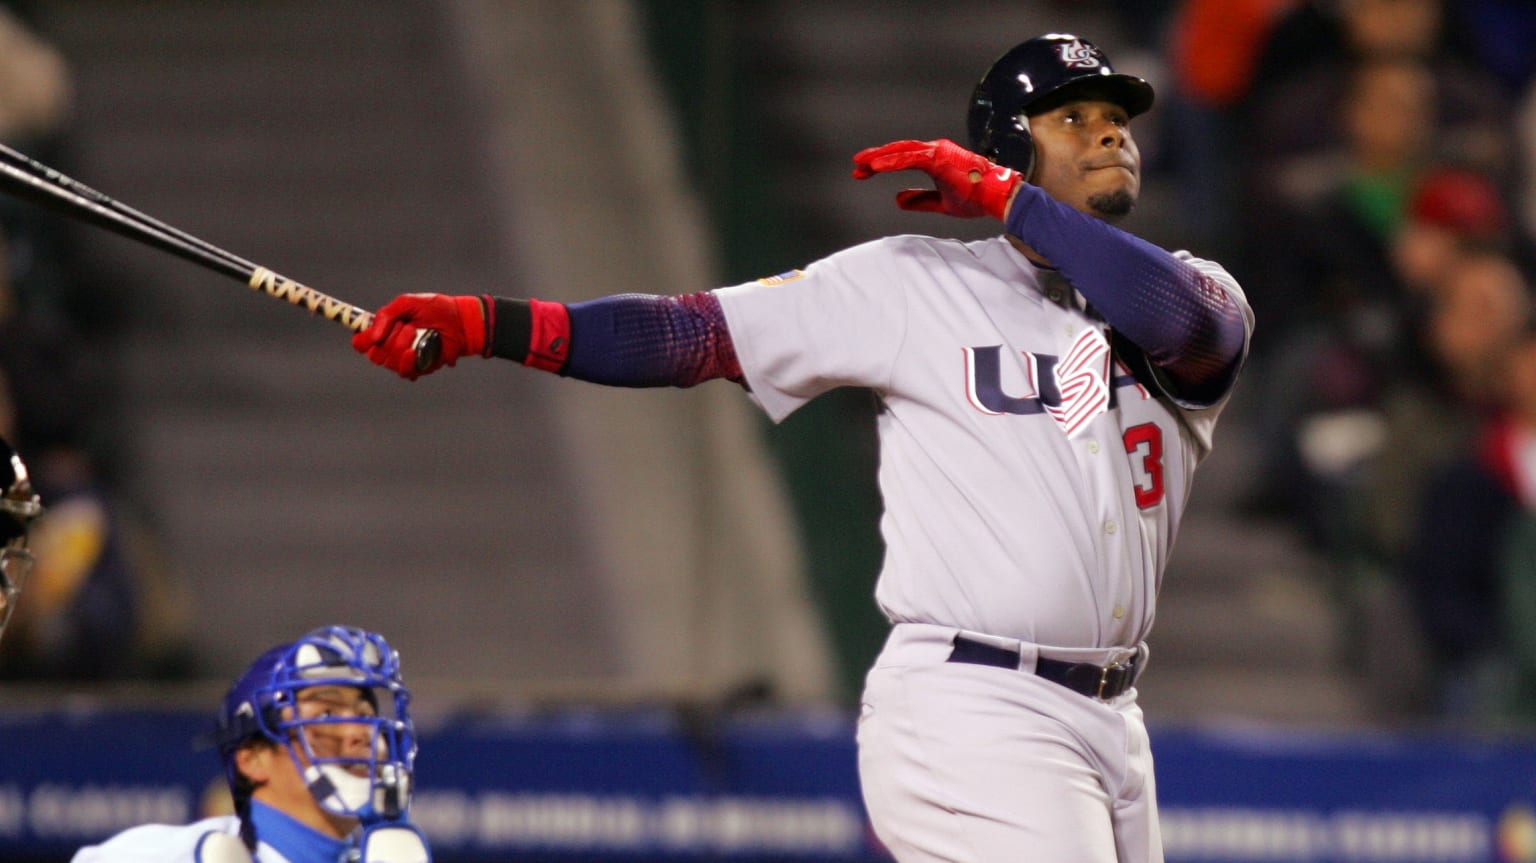 Ken Griffey Jr. follows through on a swing while playing for Team USA